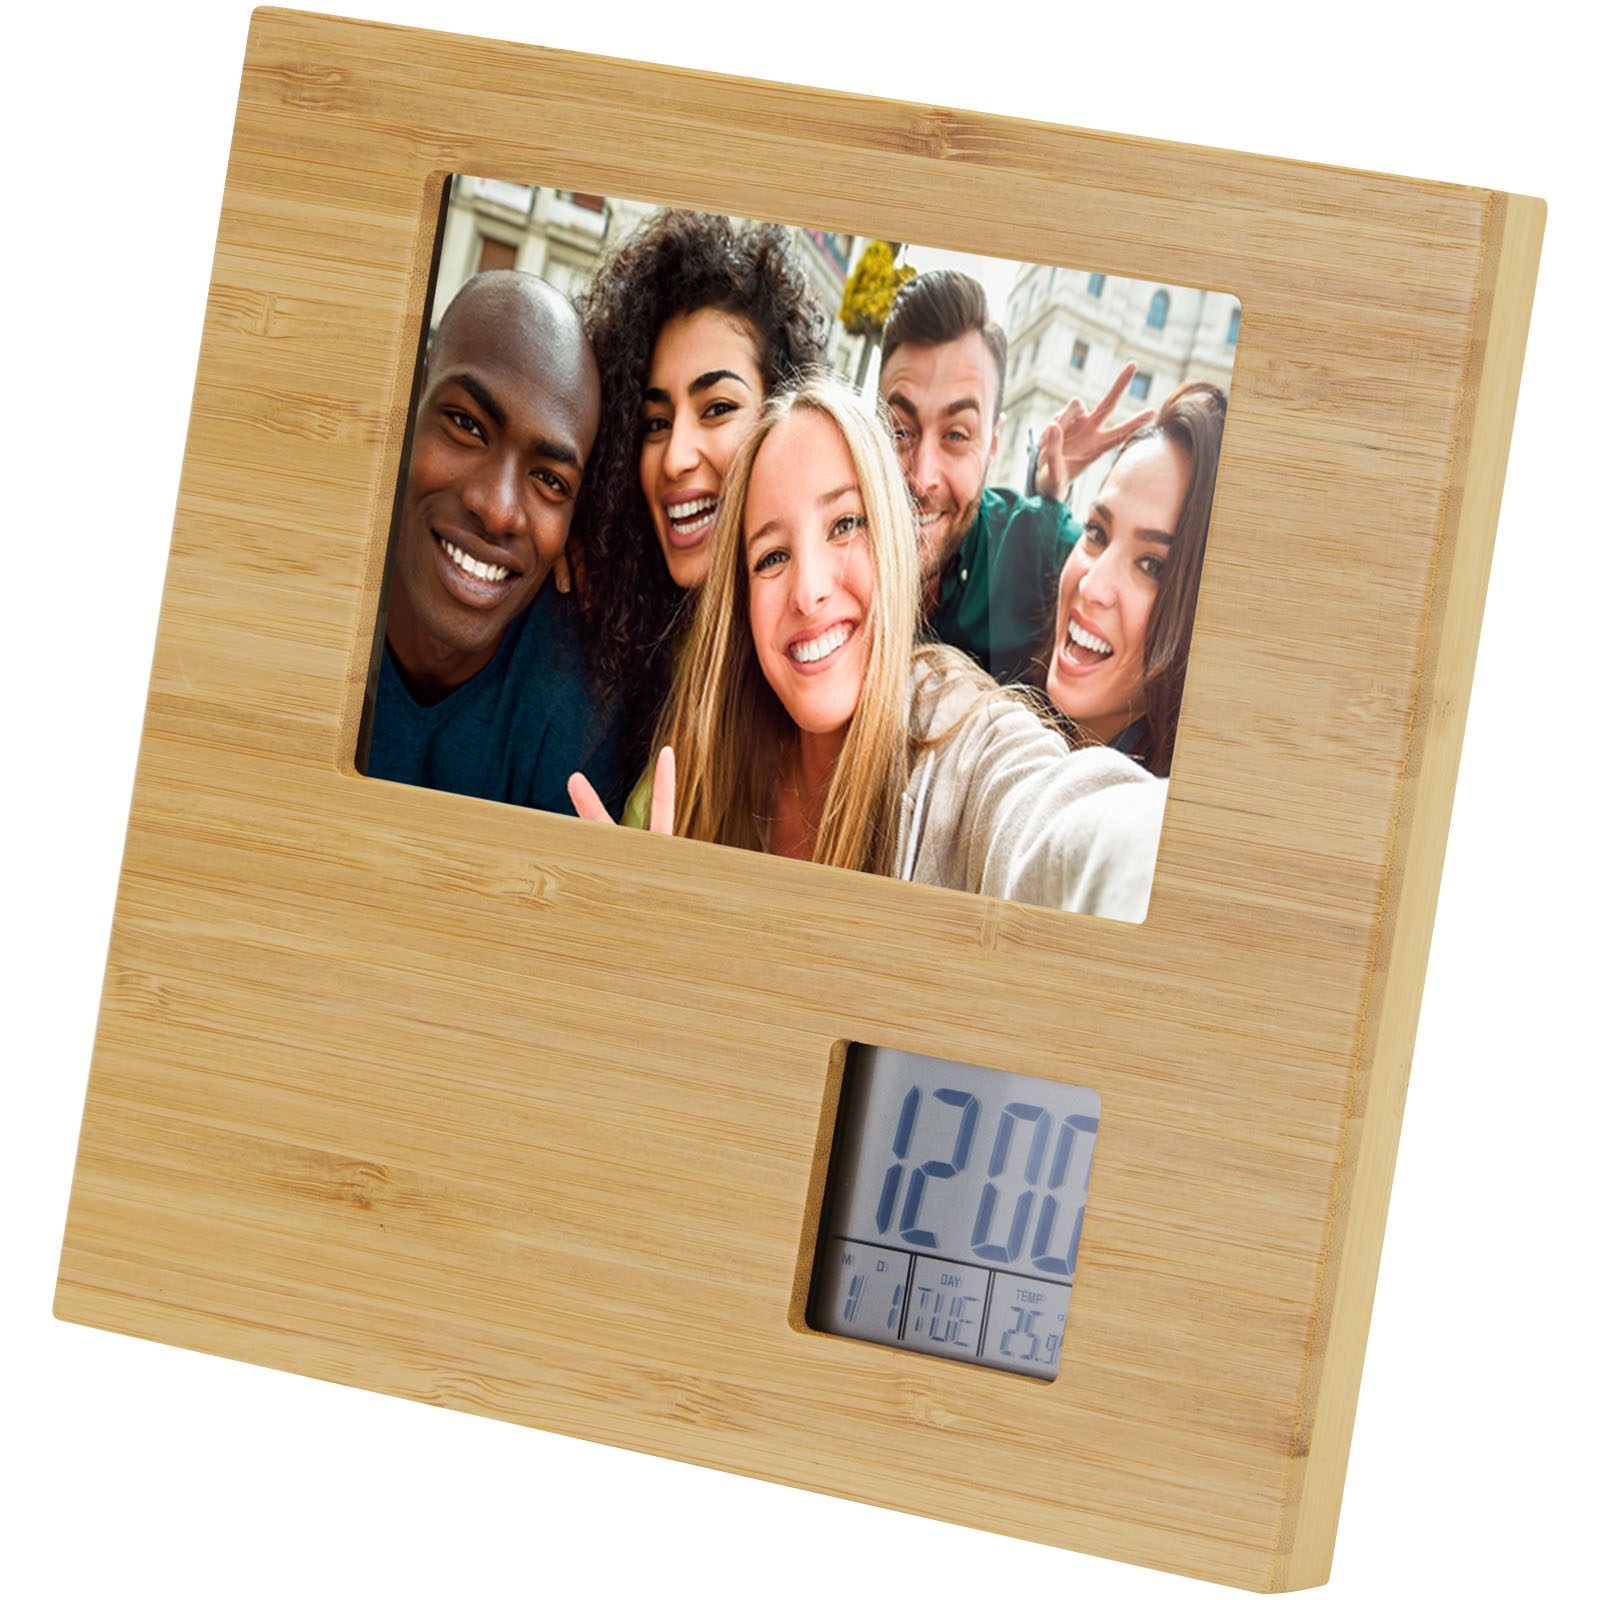 Advertising Home Accessories - Sasa bamboo photo frame with thermometer